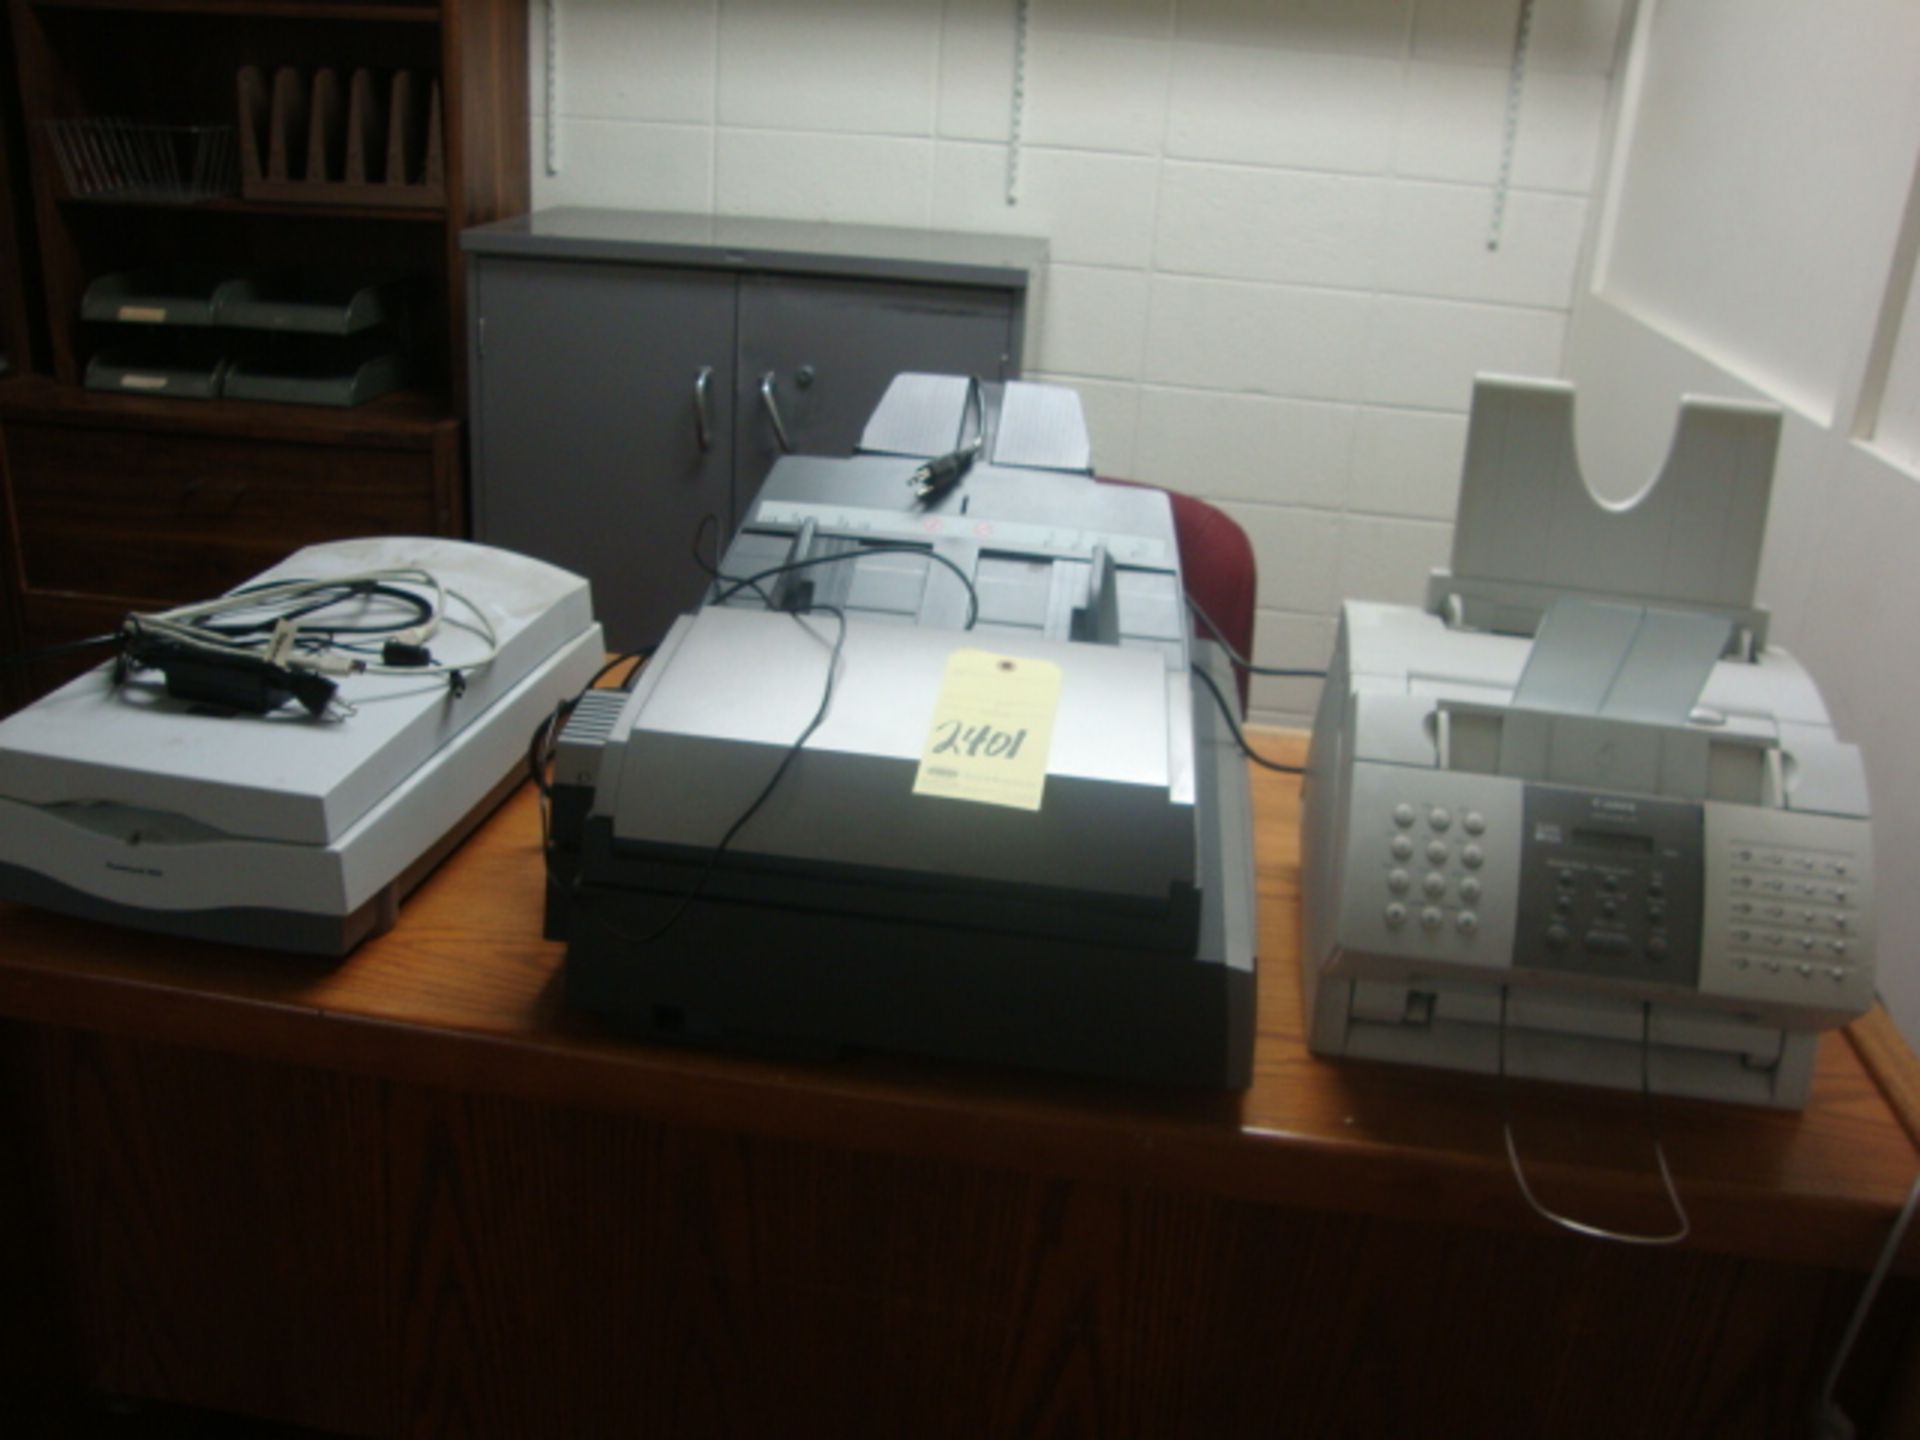 LOT CONSISTING OF POWER WORK SCANNER, XEROX COPIER, CANON FAX MACHINE